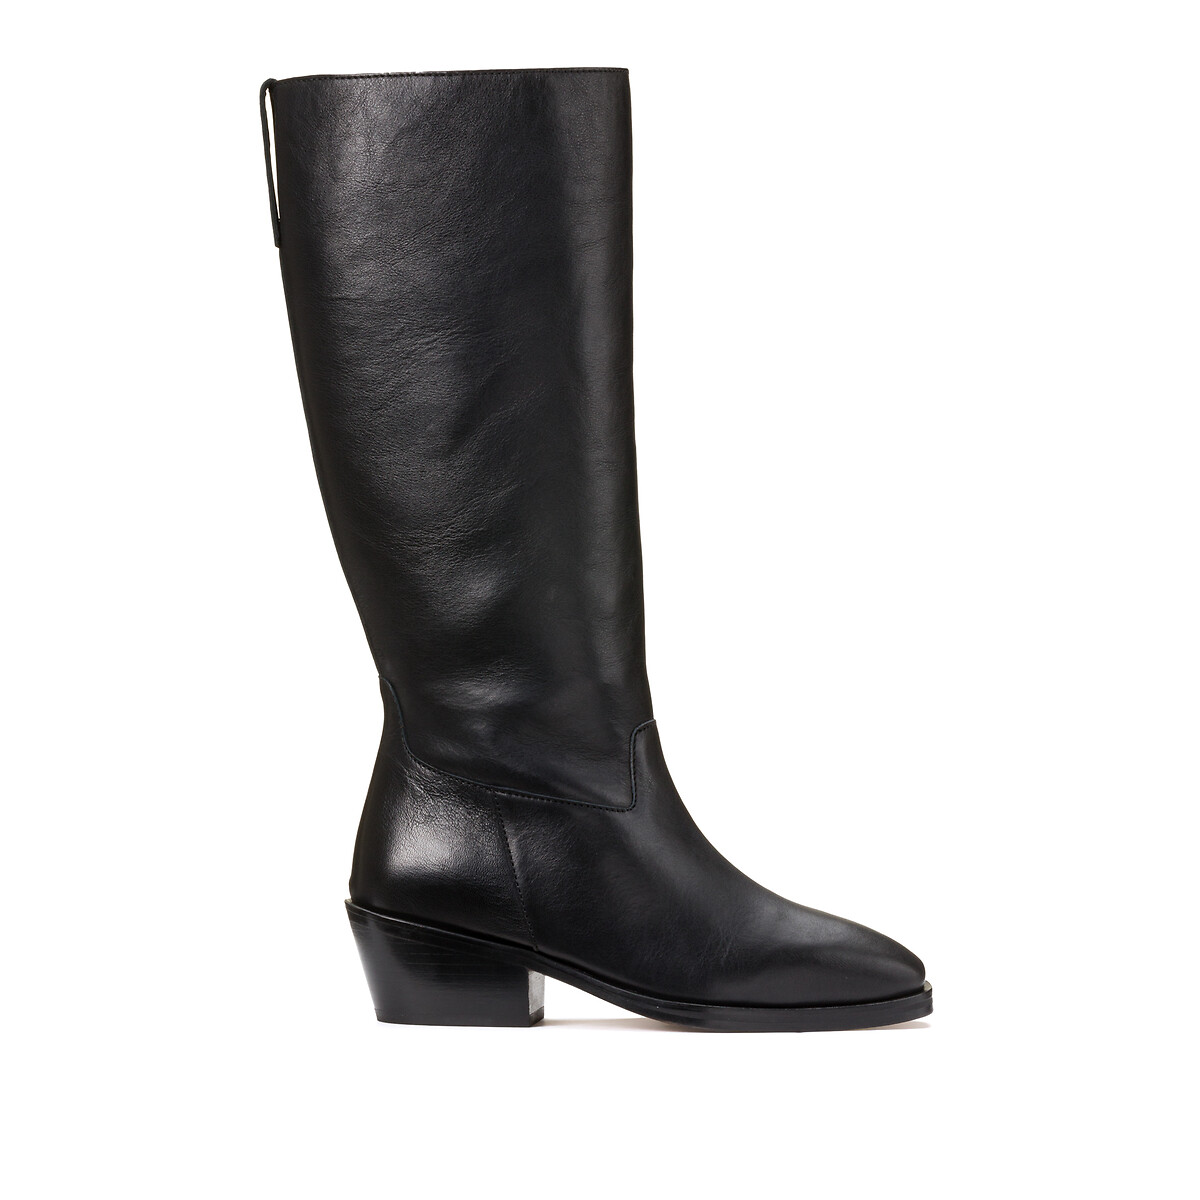 Bergam Knee-High Boots in Leather with Block Heel